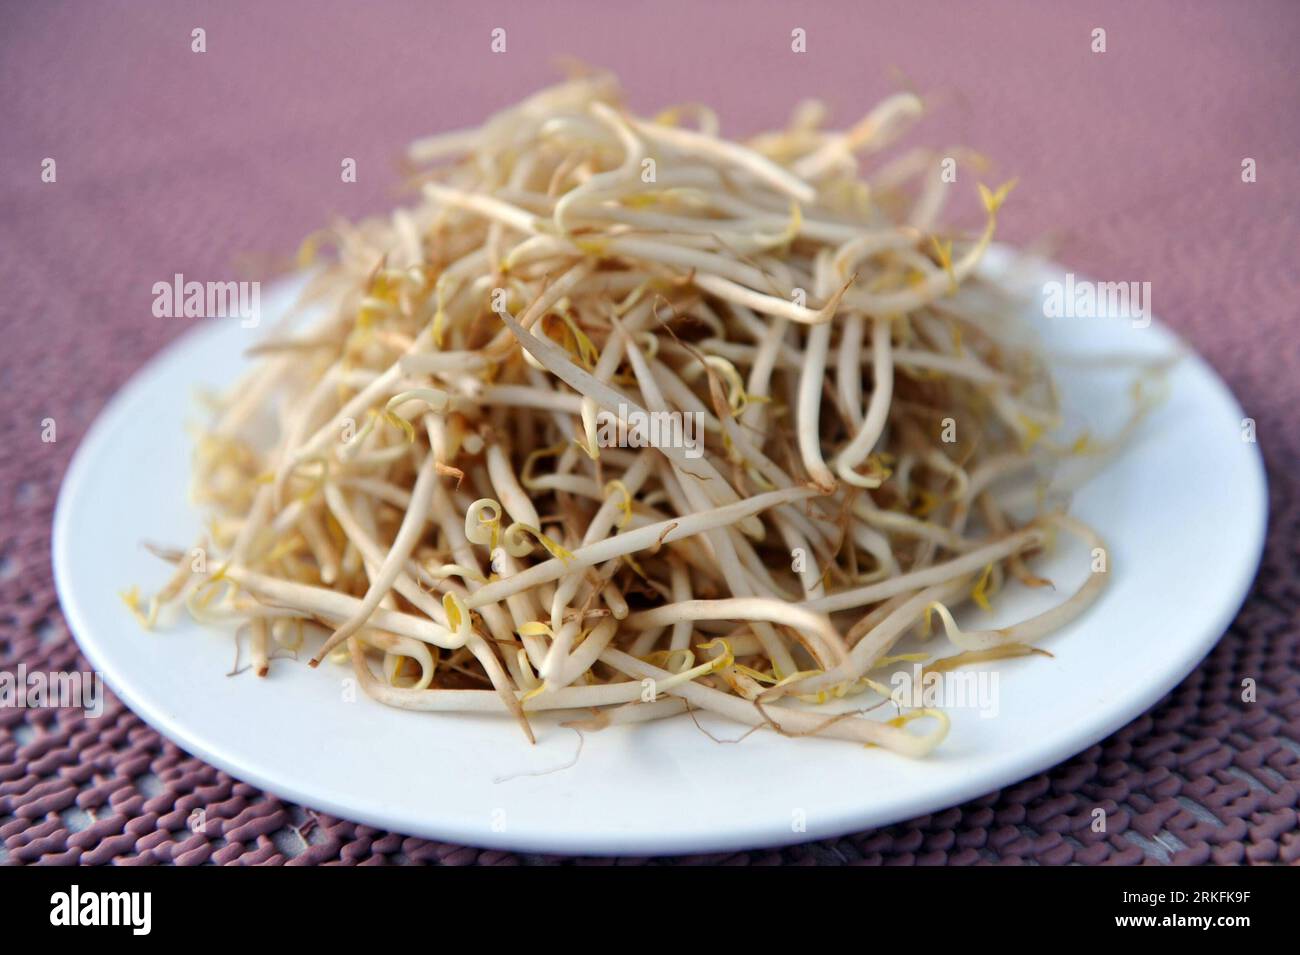 Bildnummer: 55431568  Datum: 05.06.2011  Copyright: imago/Xinhua (110605) -- BERLIN, June 5, 2011 (Xinhua) -- Photo taken on June 5, 2011 shows a plate of bean sprouts at a restaurant in Berlin, capital of Germany. German authority said on Sunday that bean sprouts might be the most convincing source for the E. coli outbreak which has killed 22 and infected more than 2,000 in the Europe. (Xinhua/Ma Ning) GERMANY-E. COLI OUTBREAK-BEAN SPROUTS PUBLICATIONxNOTxINxCHN Food Sprossen xkg 2011 quer  o0 Ehec, Gesundheit,, Bakterien, Keime, Sojasprossen, Salatsprossen    Bildnummer 55431568 Date 05 06 2 Stock Photo